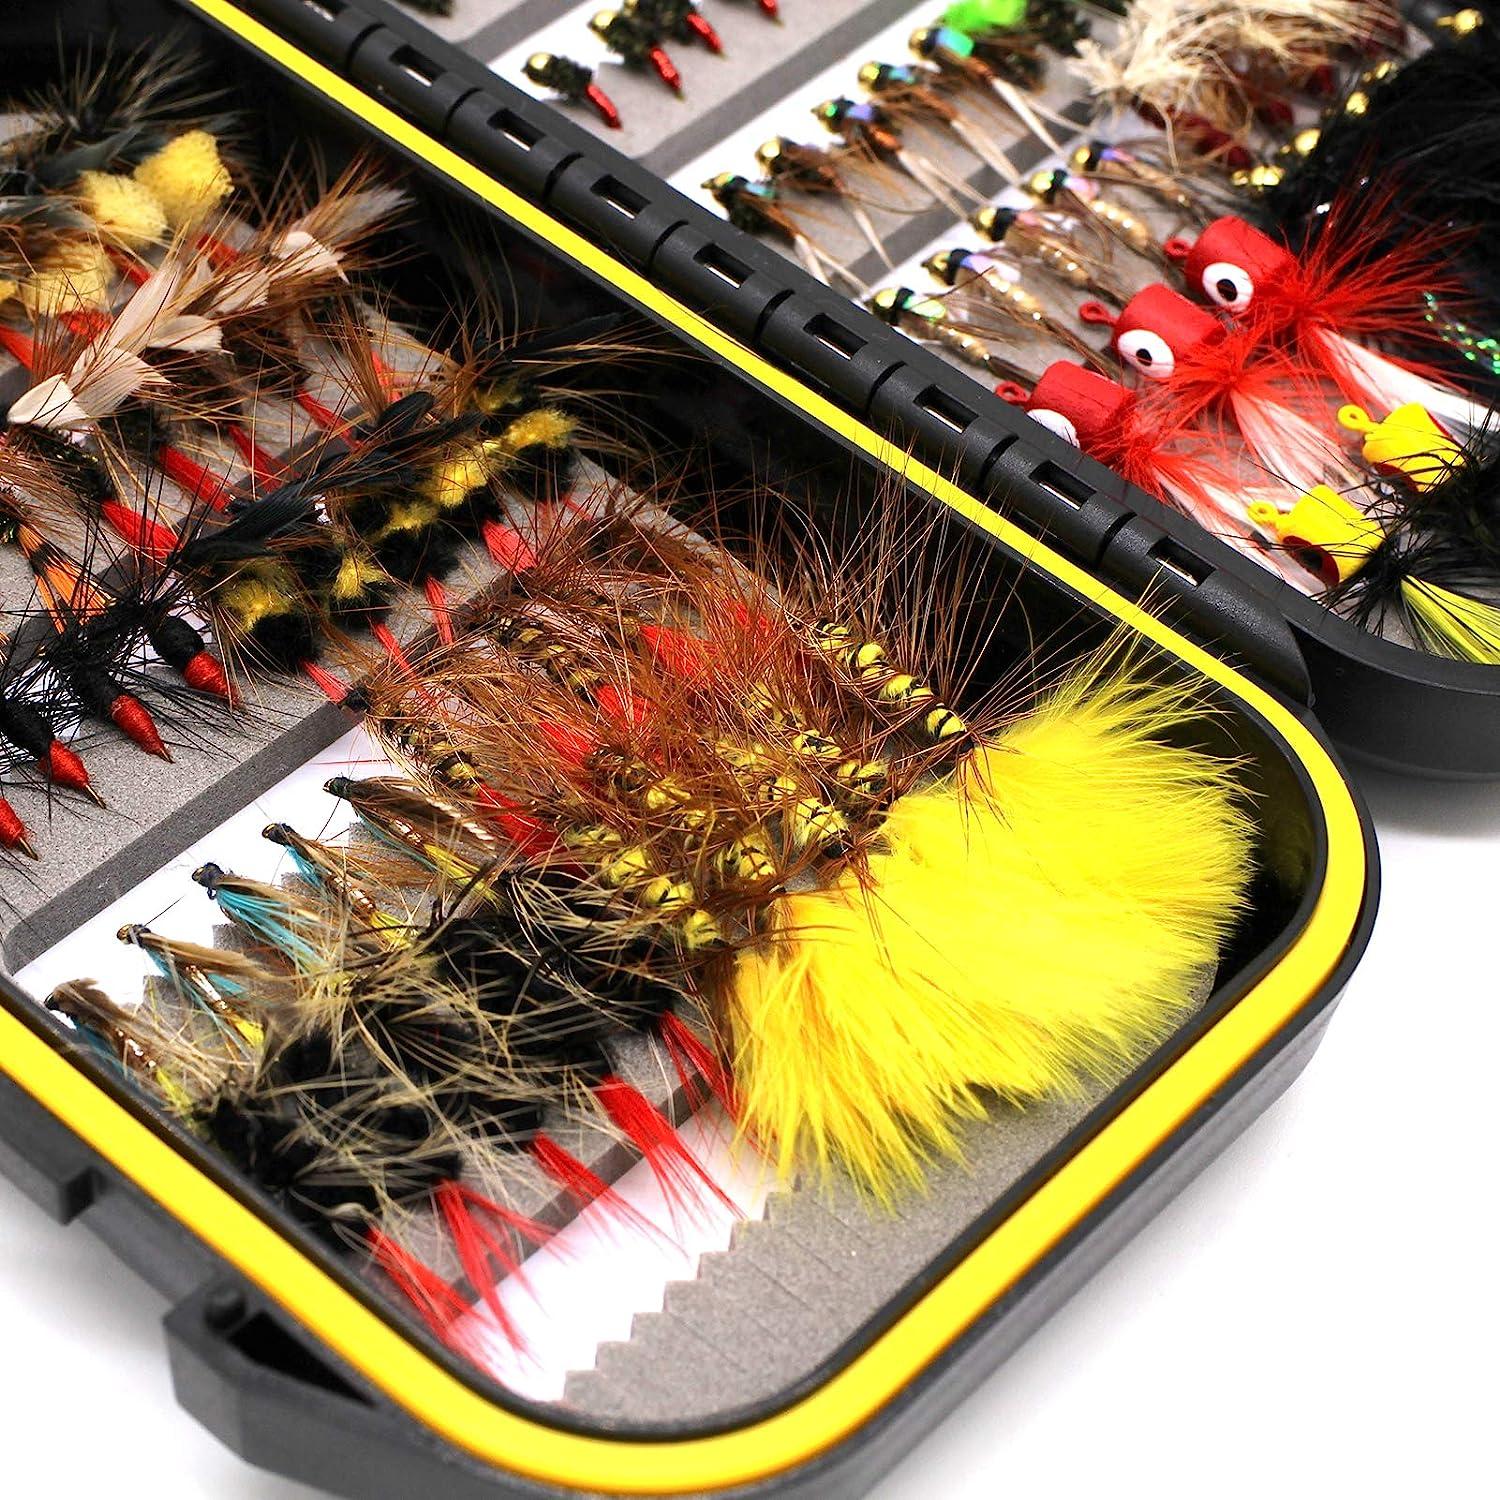 RiverBum Bass Fly Fishing Flies Assortment Kit with Fly Box, Skully  Buggers, Bunny Leech, Poppers, Mr Creepo Flies for Fly Fishing - 10 Piece